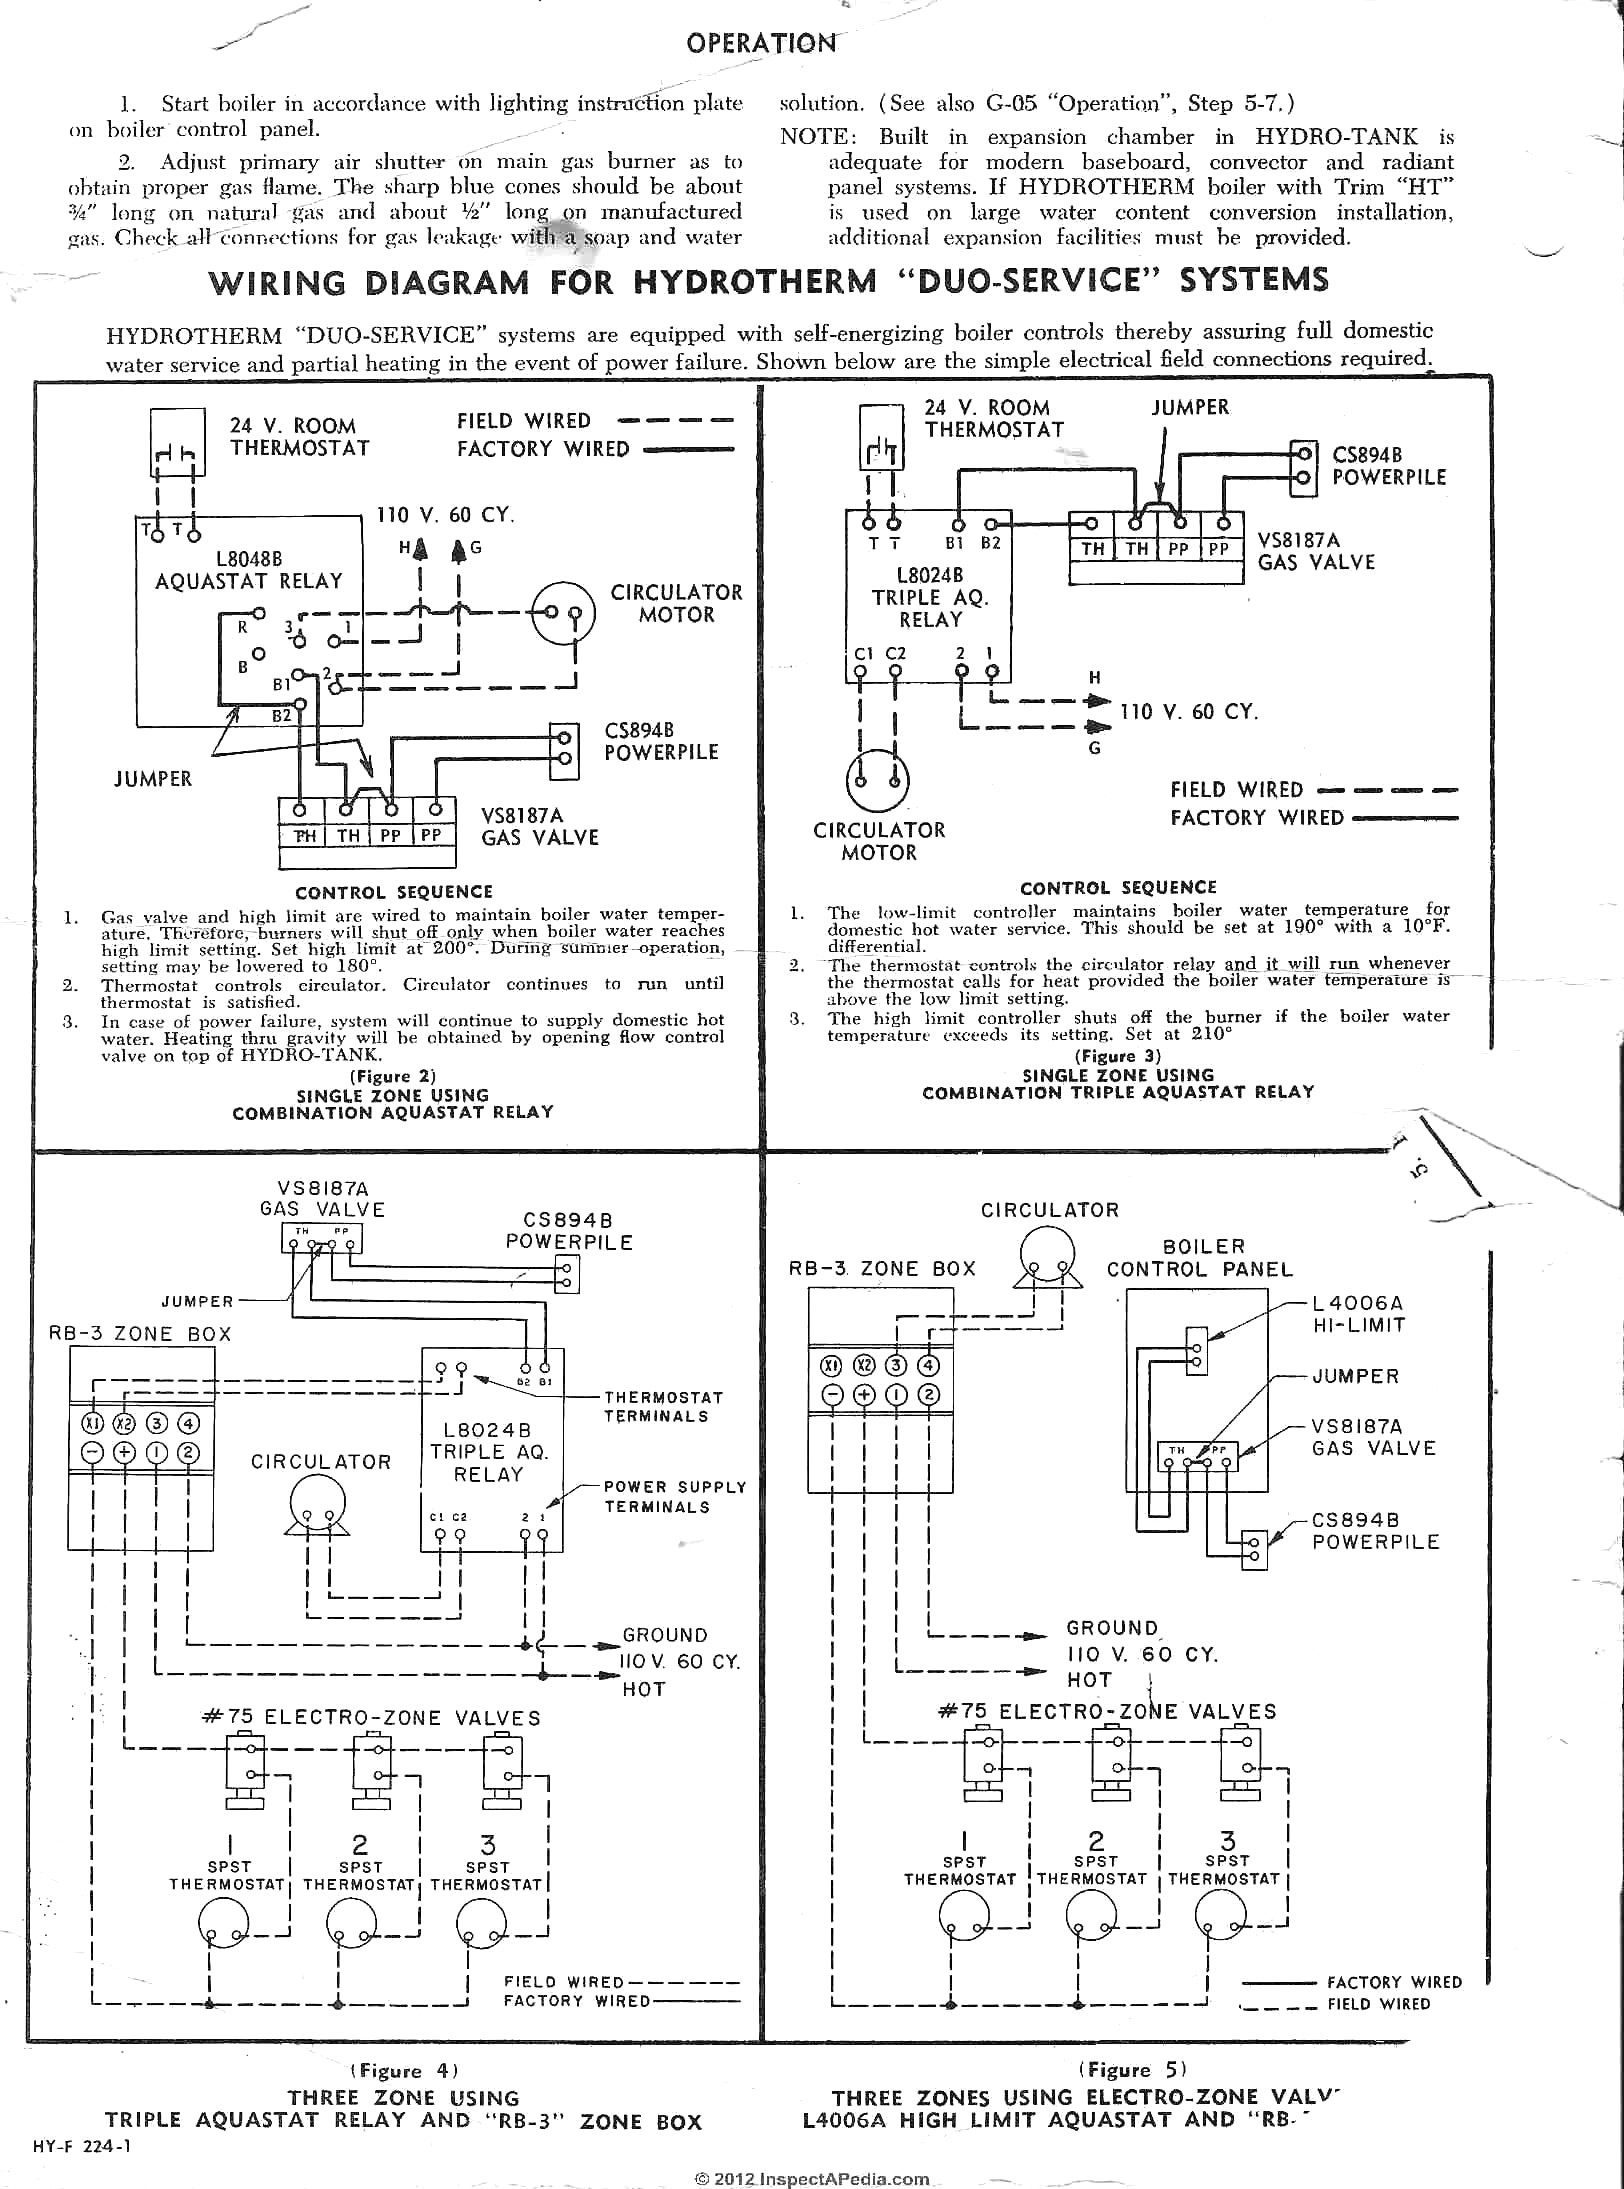 white rodgers 1311 102 wiring diagram Download-White Rodgers Gas Valve Wiring Diagram 36 03 Wiring Diagram 1-e